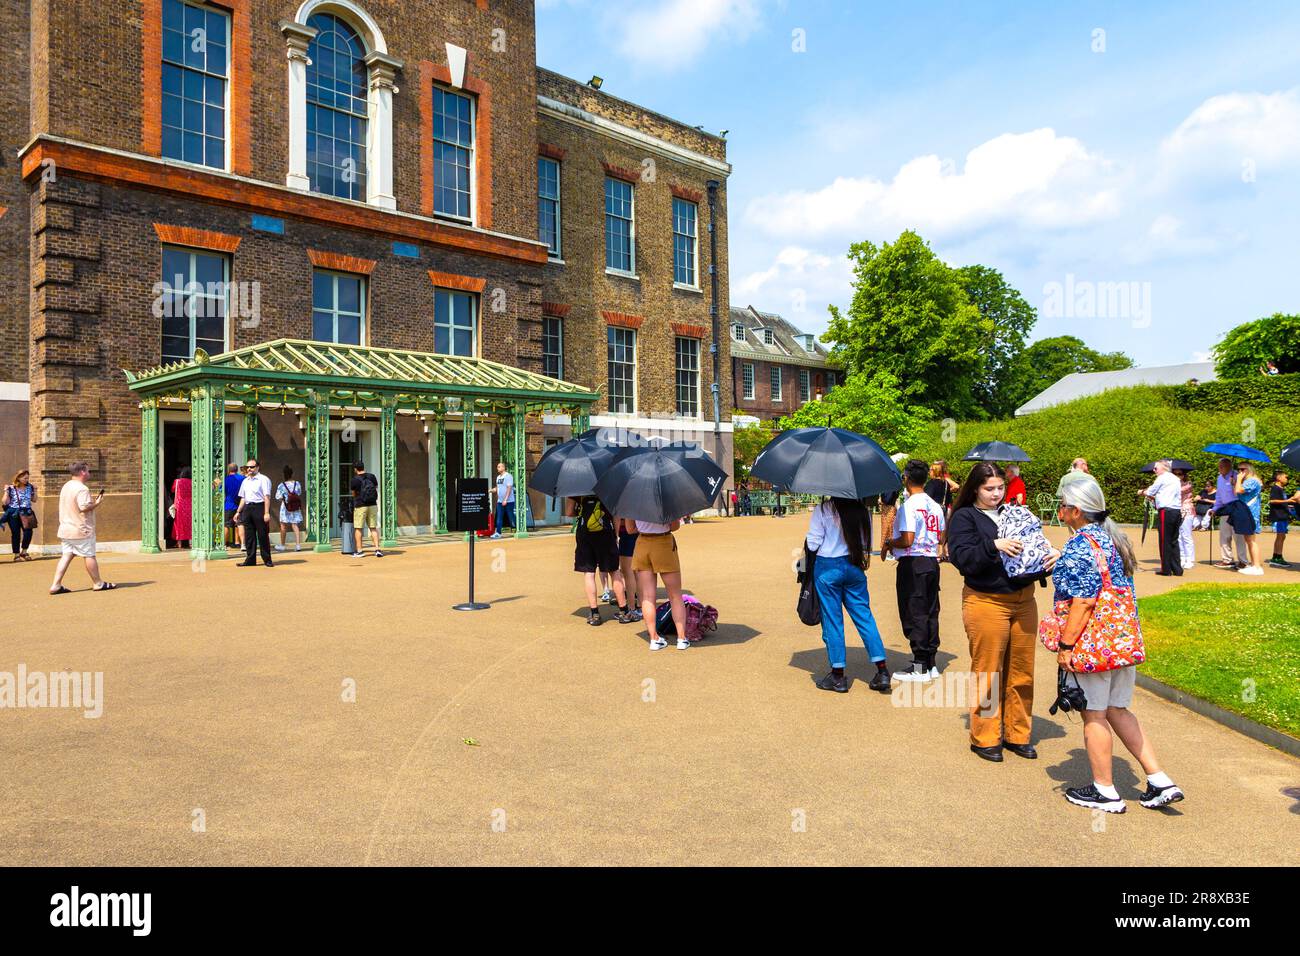 Tourists with umbrellas on a hot summer day waiting in queue to Kensington Palace, London, England, UK Stock Photo